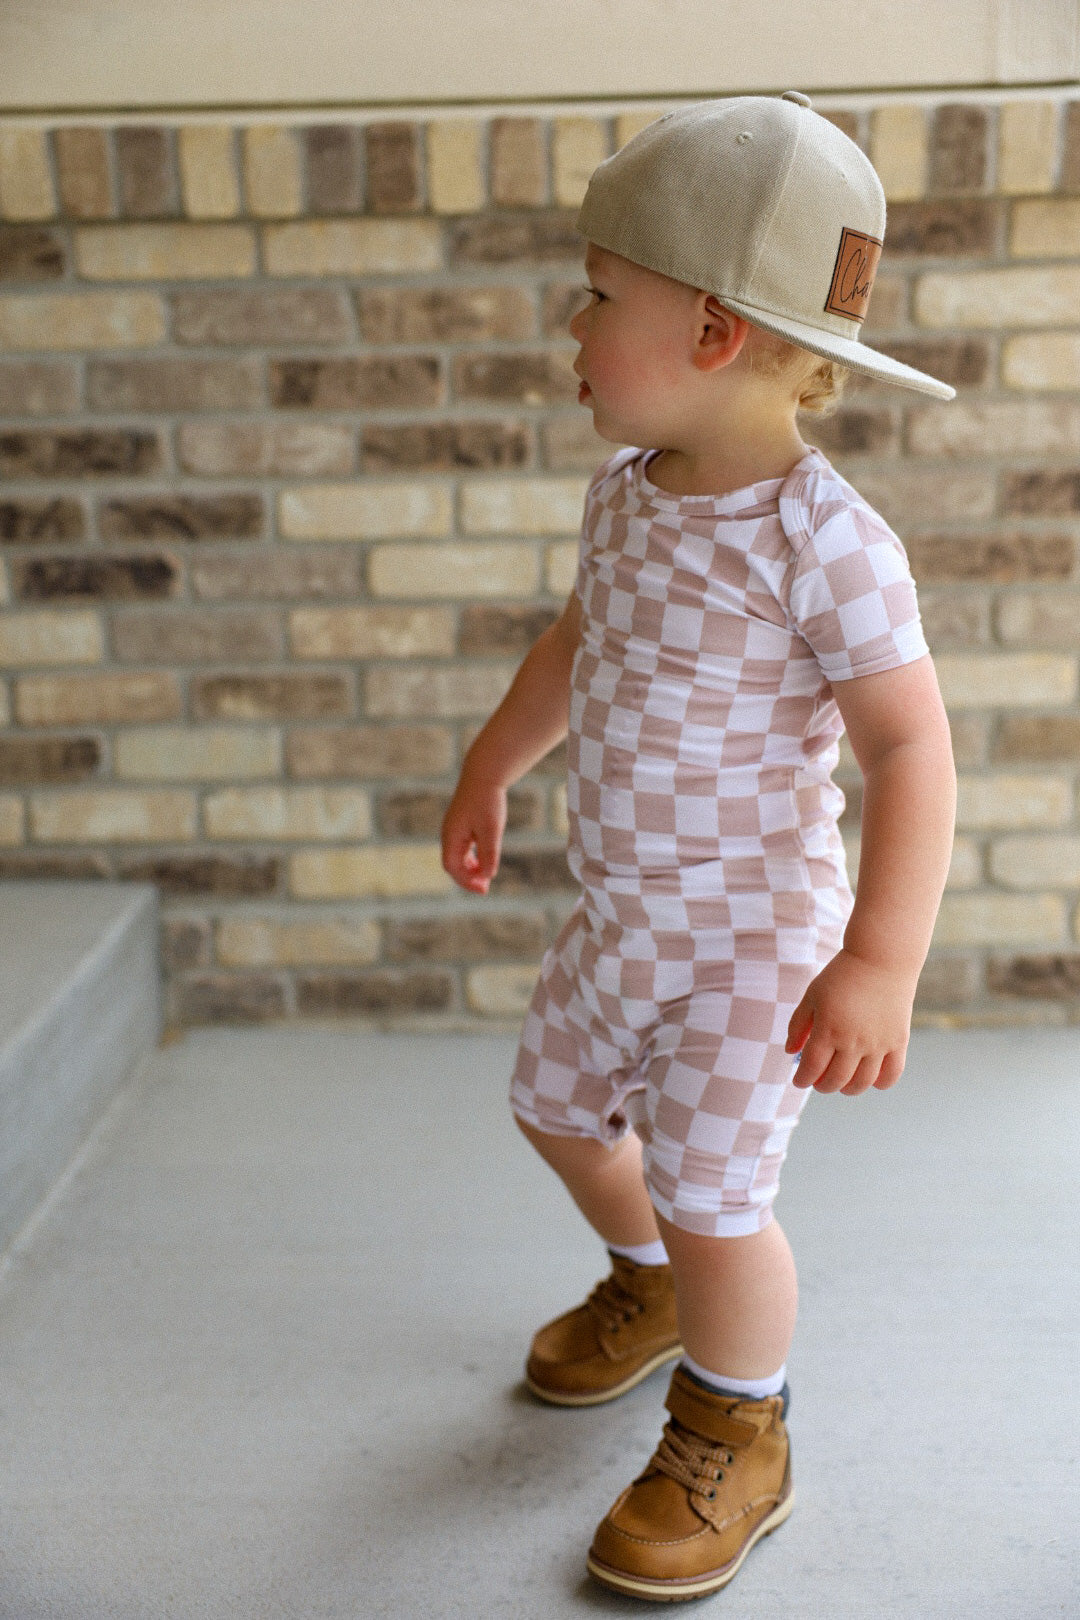 Charlie Lou Baby Unisex Checkered Shortie Romper - Baby - Tan/Beige - Size 3-6 Months - Checkered Multicolor